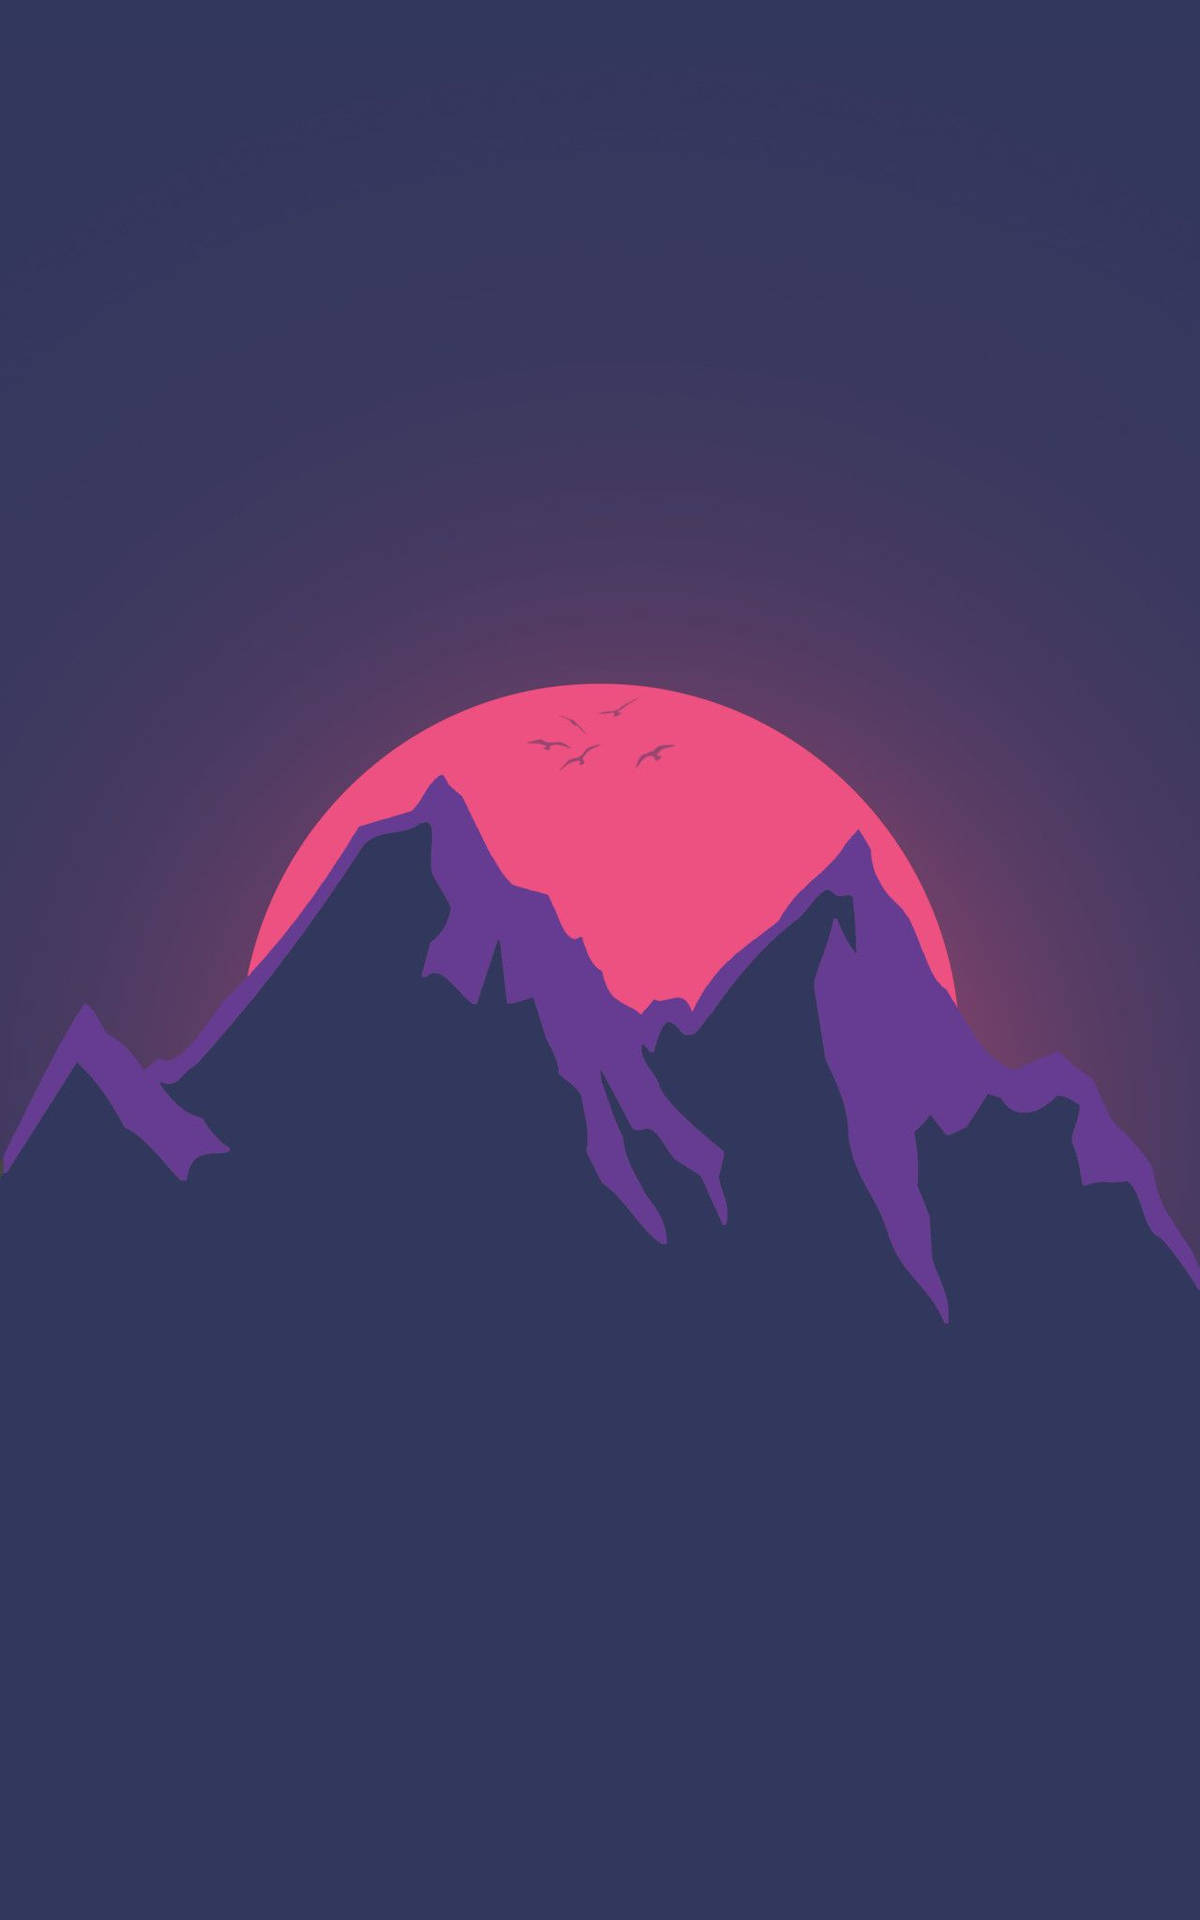 Mountain And Moon Art Smartphone Background Wallpaper